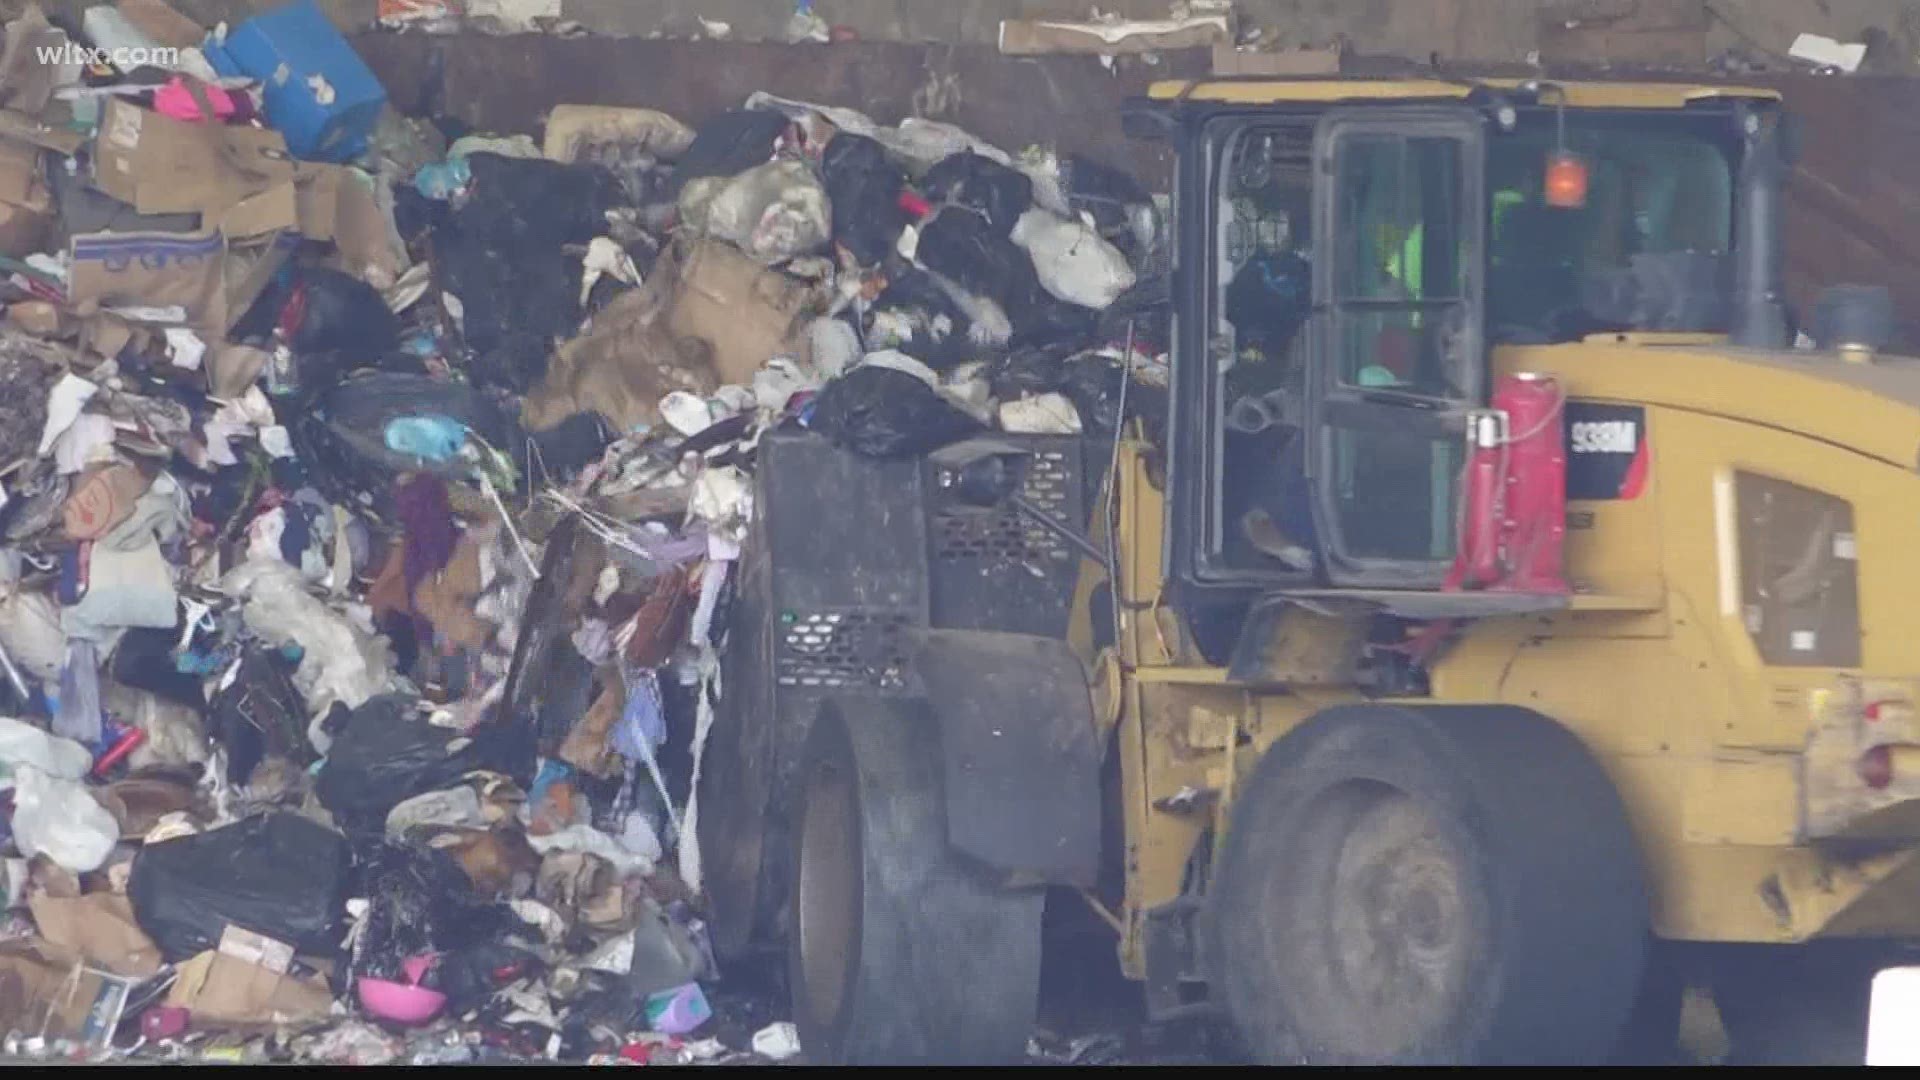 With less drivers being available, some routes have been dropped. The county says collection agencies are mainly taking care of household waste and recycling.